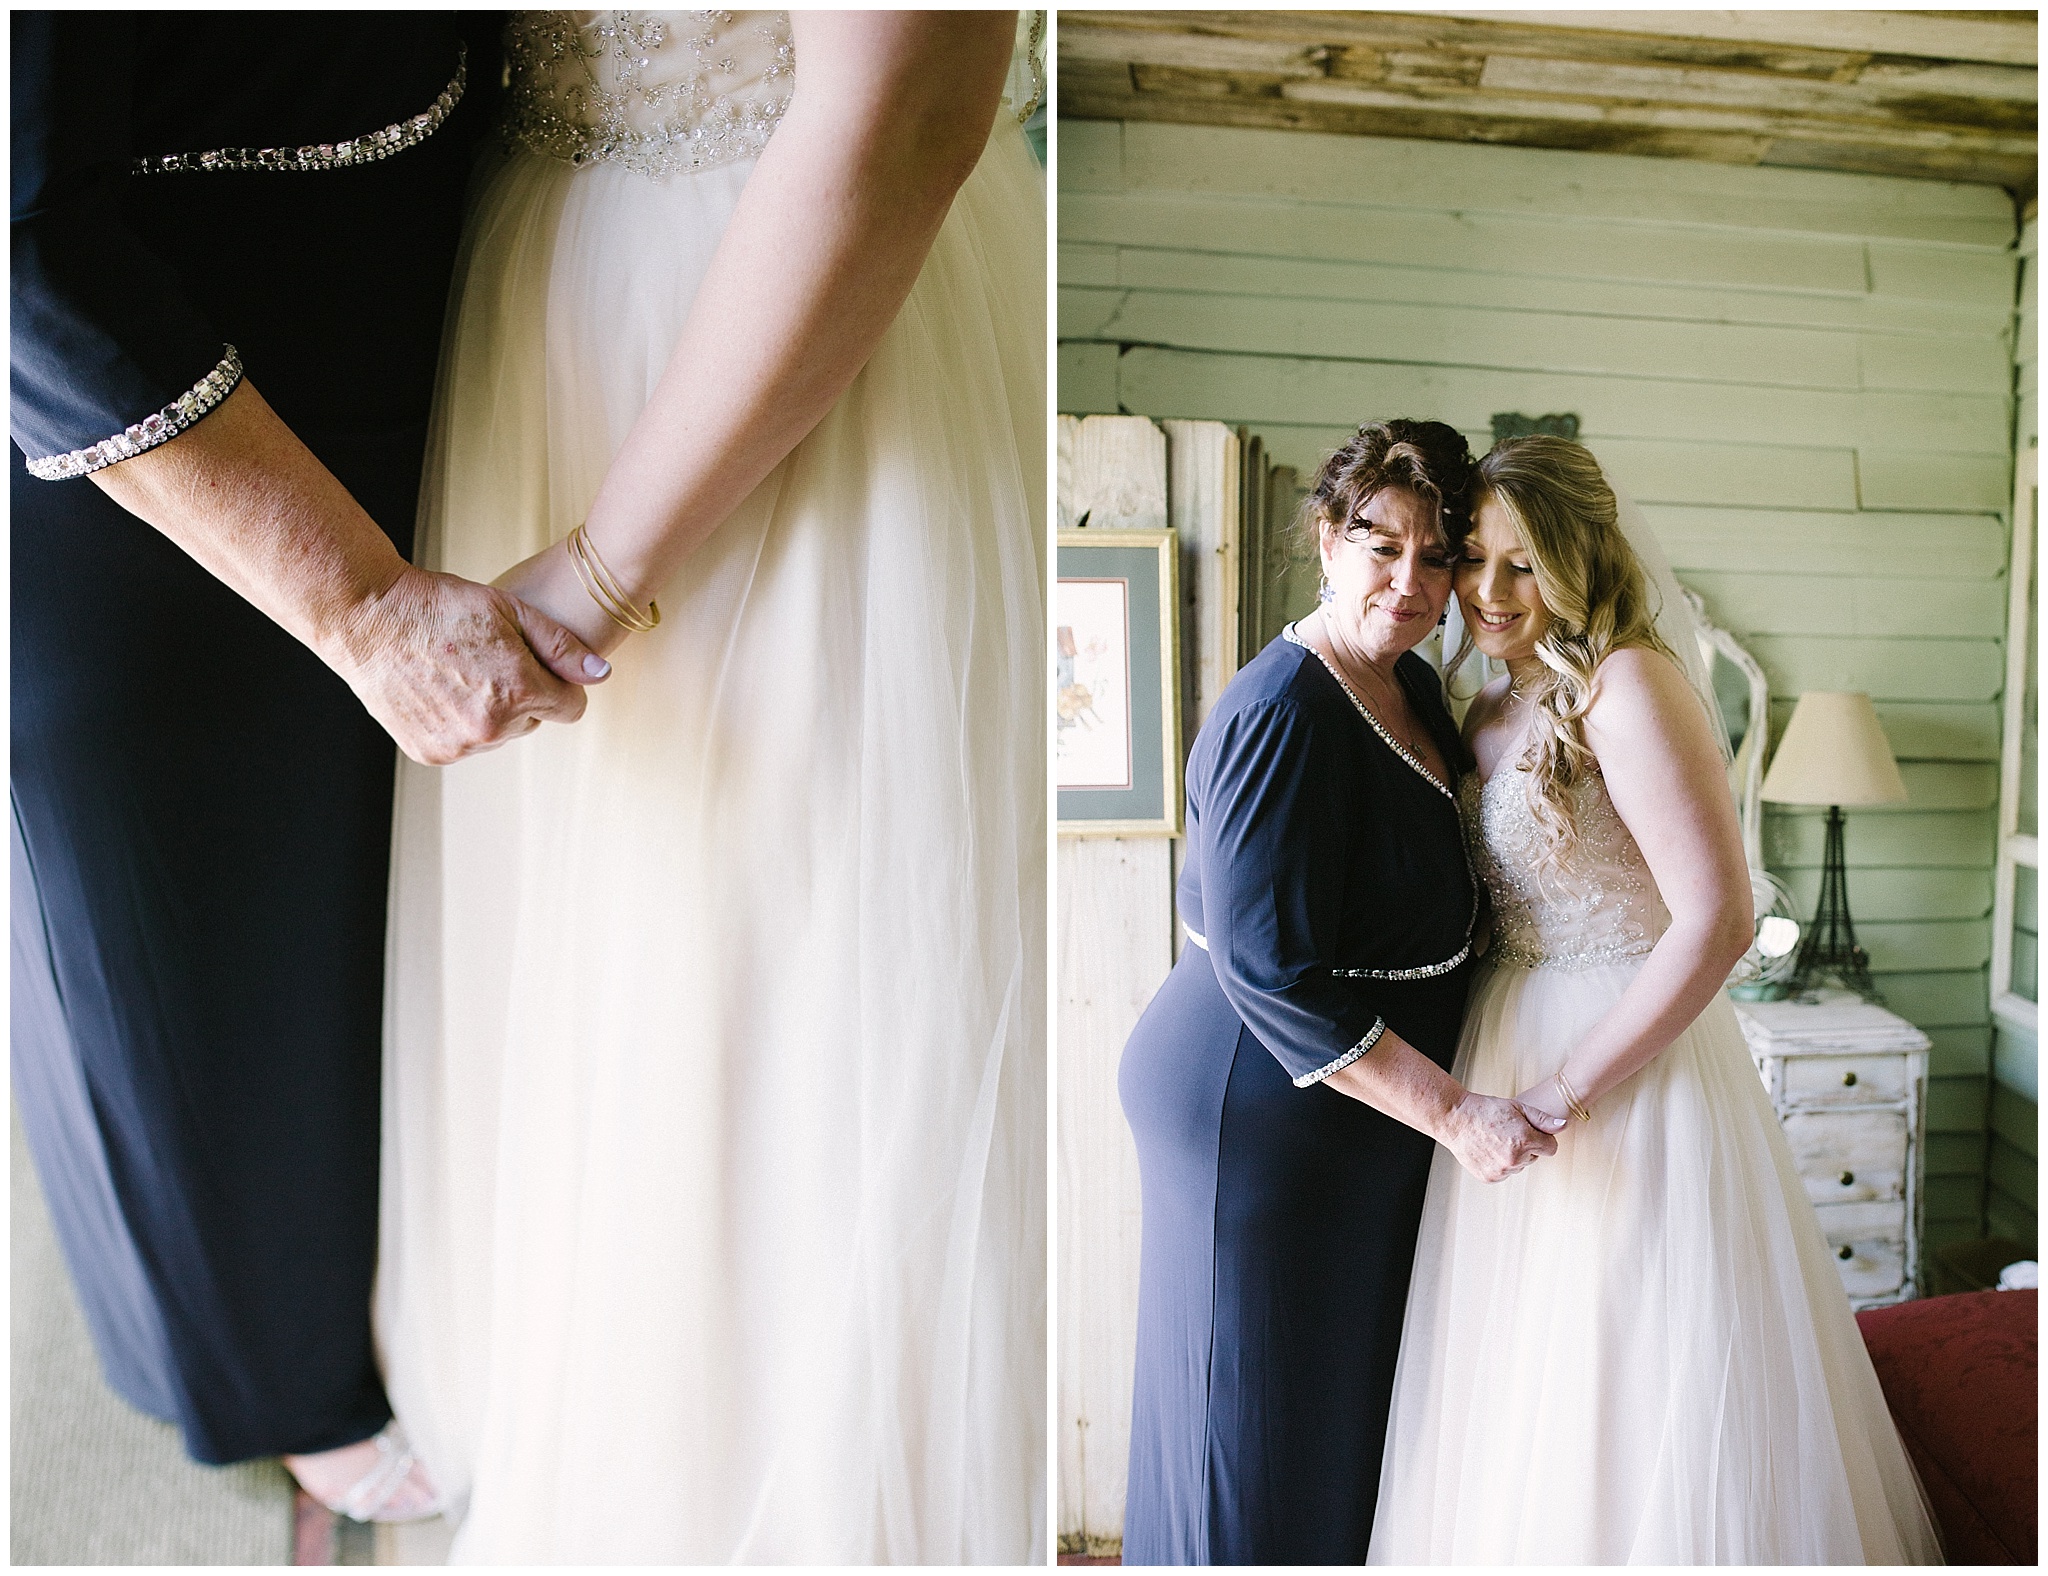 Sydney and her mother did a first look. I LOVE when a bride does a first look with her parent!